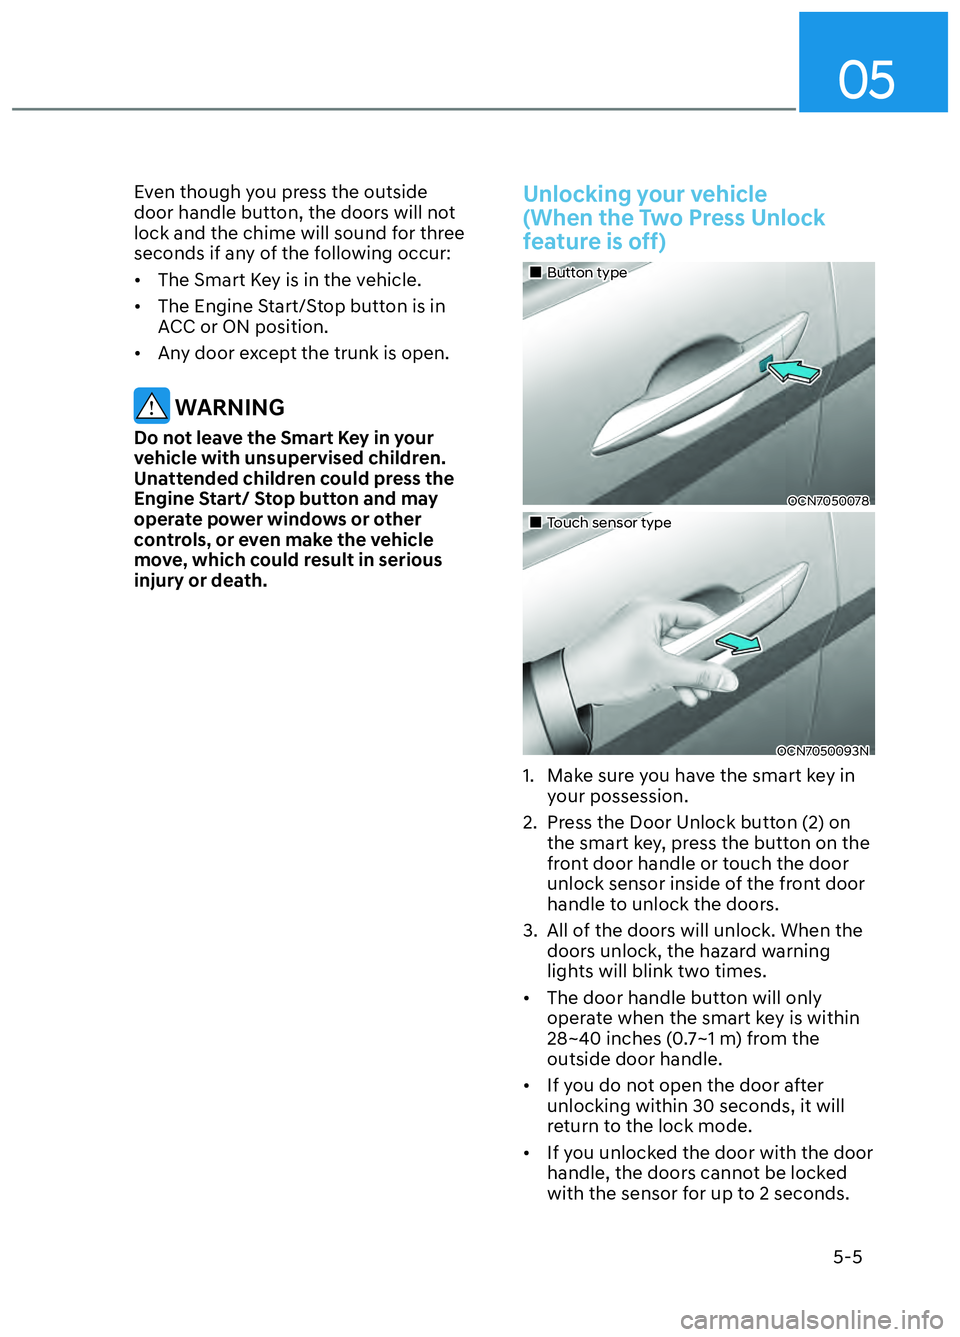 HYUNDAI ELANTRA N 2022  Owners Manual 05
5-5
Even though you press the outside 
door handle button, the doors will not 
lock and the chime will sound for three 
seconds if any of the following occur:
•  The Smart Key is in the vehicle.
